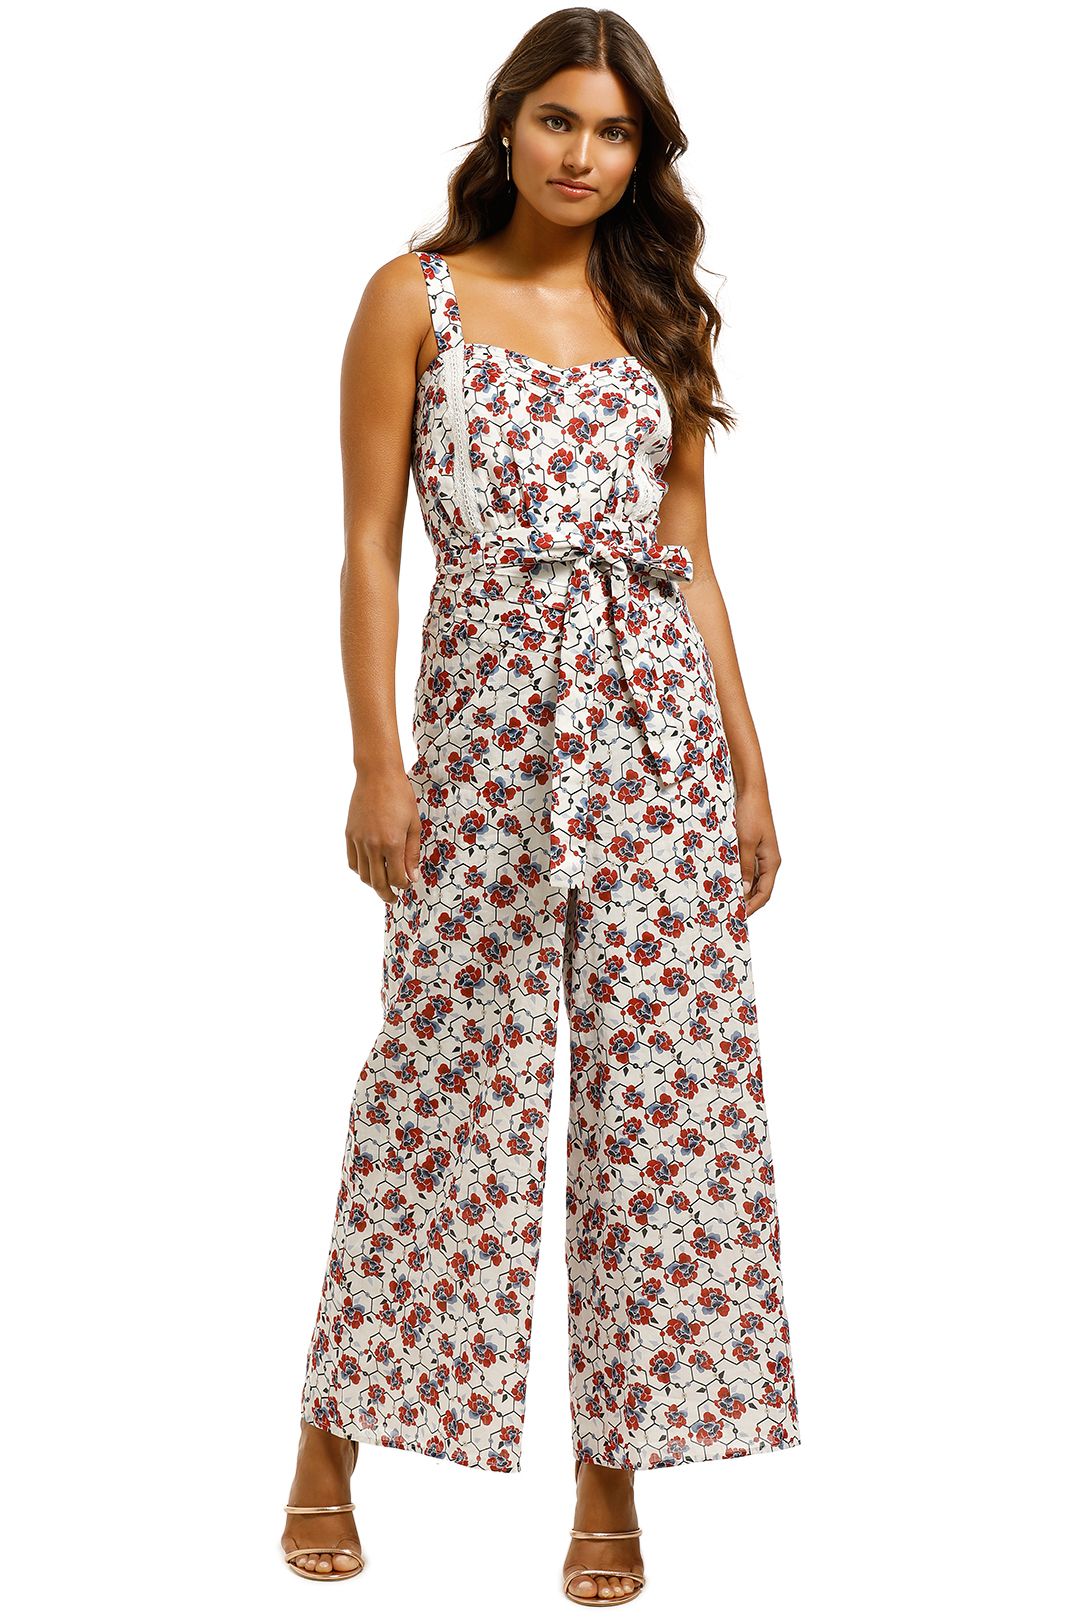 Stevie-May-Sunni-Jumpsuit-Sunni-Floral-Front